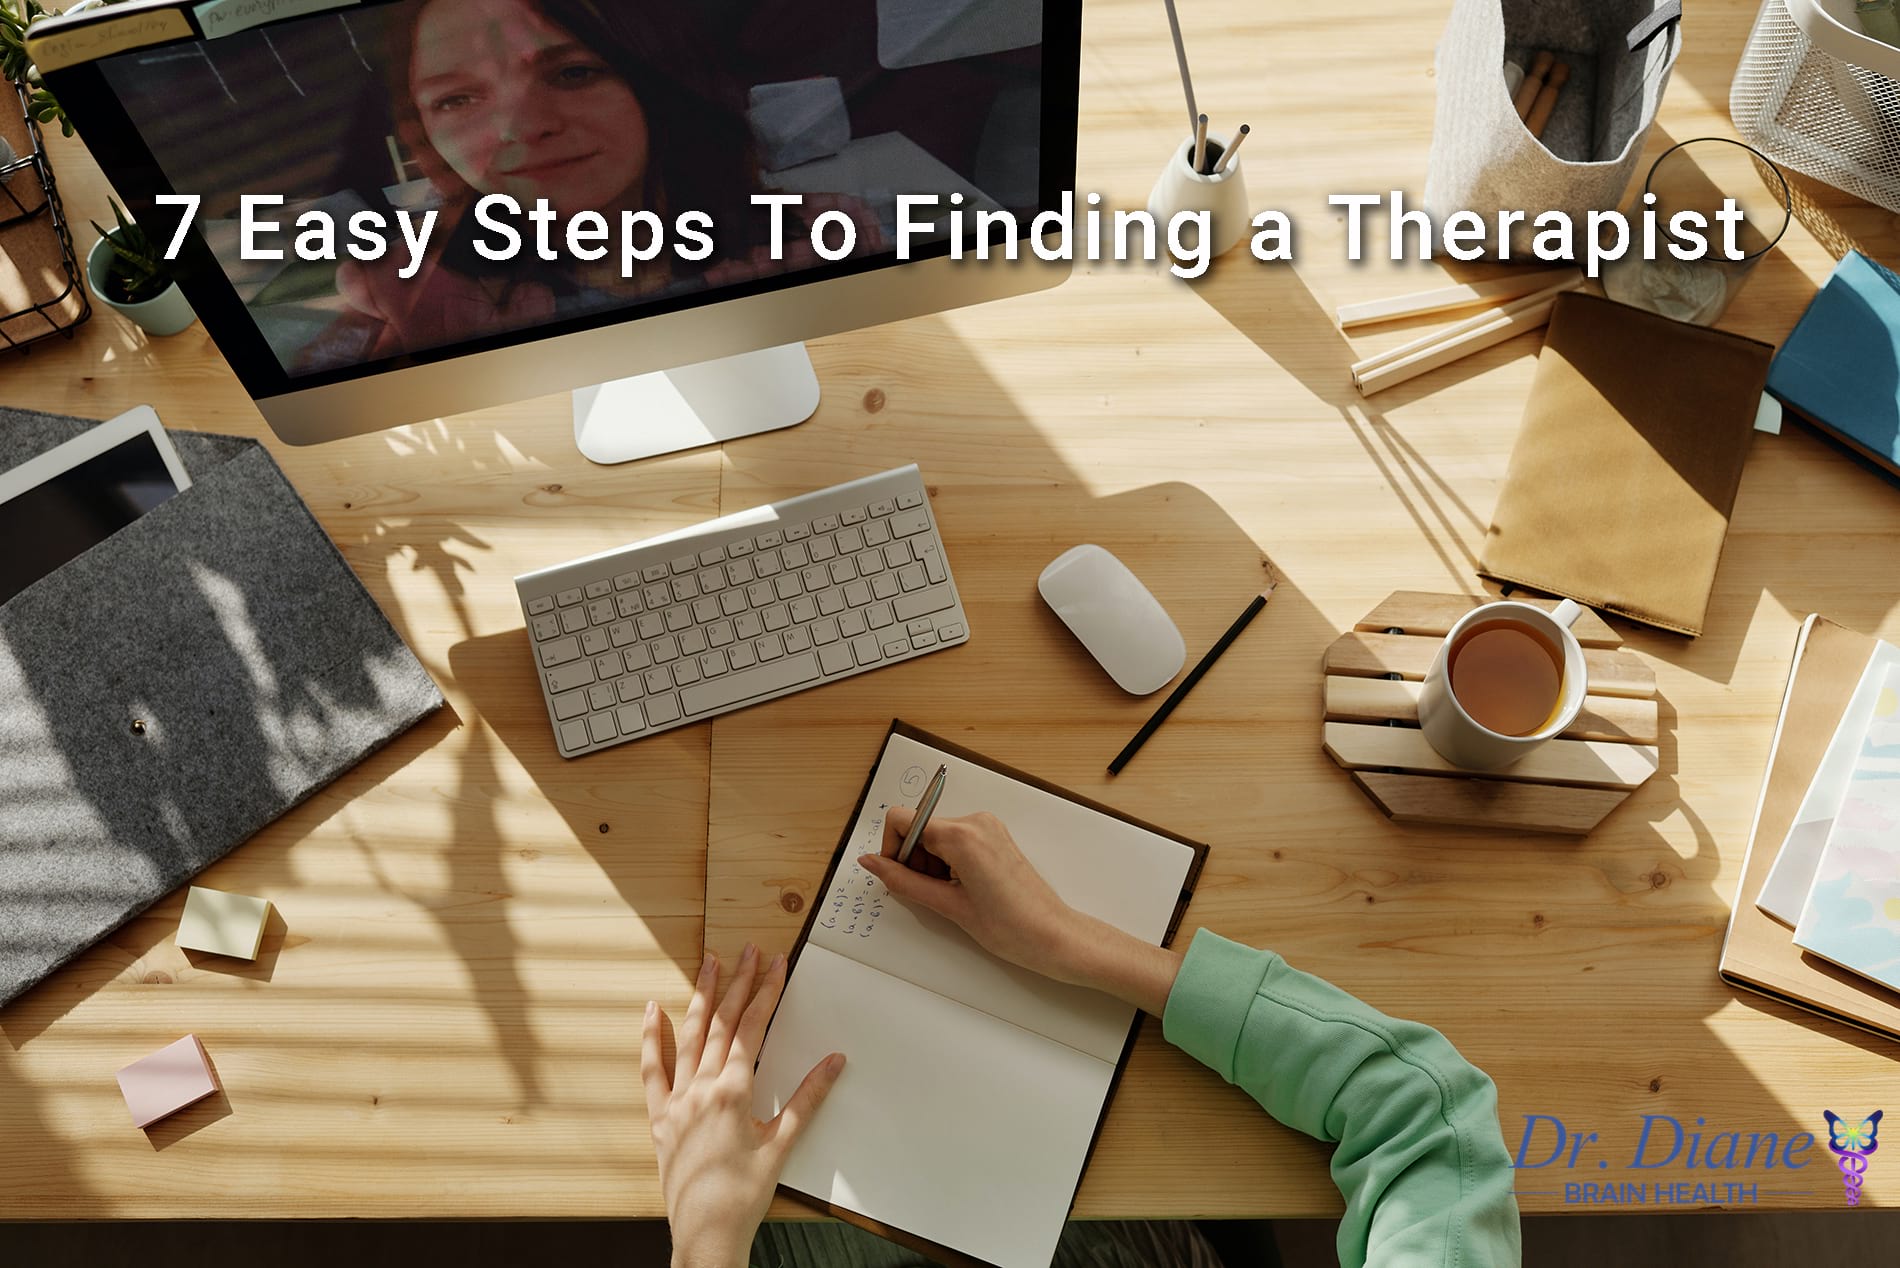 7 Easy Steps to Finding a Therapist